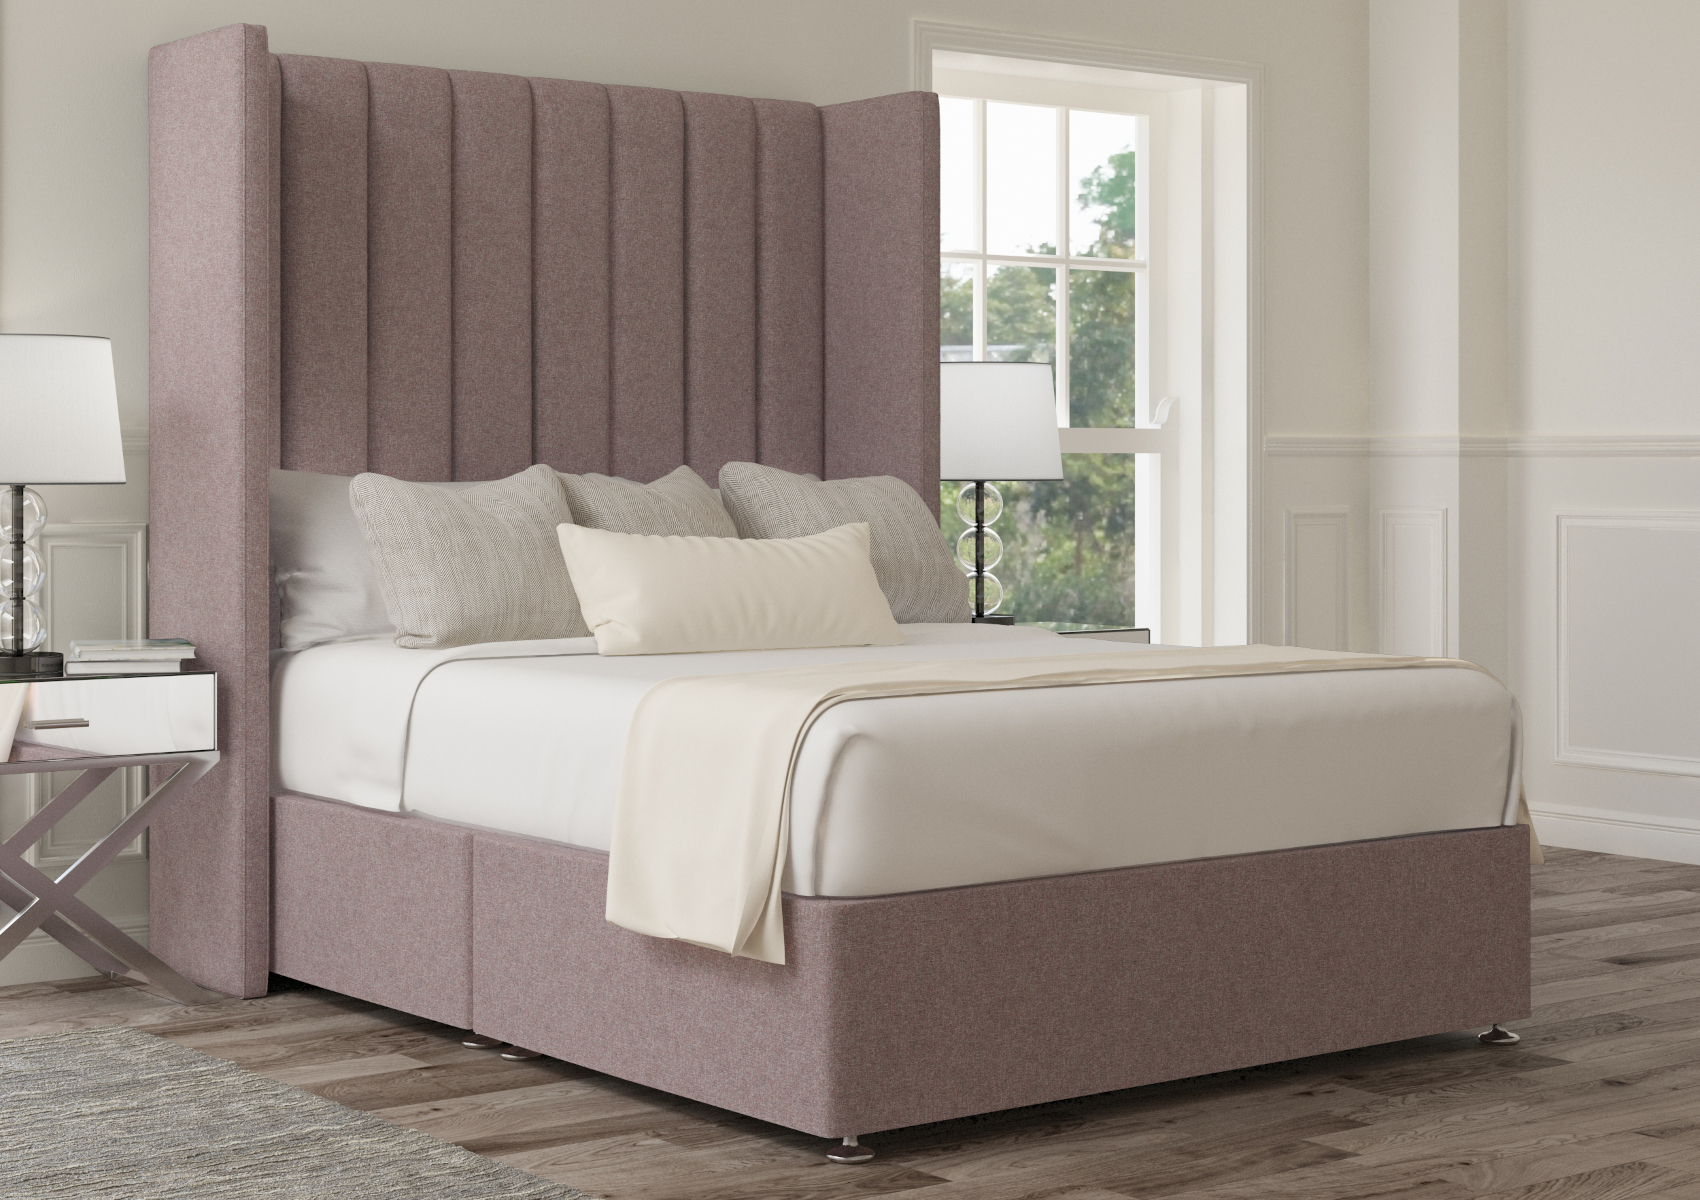 View Lola Arran Natural Upholstered King Size Winged Bed Time4Sleep information